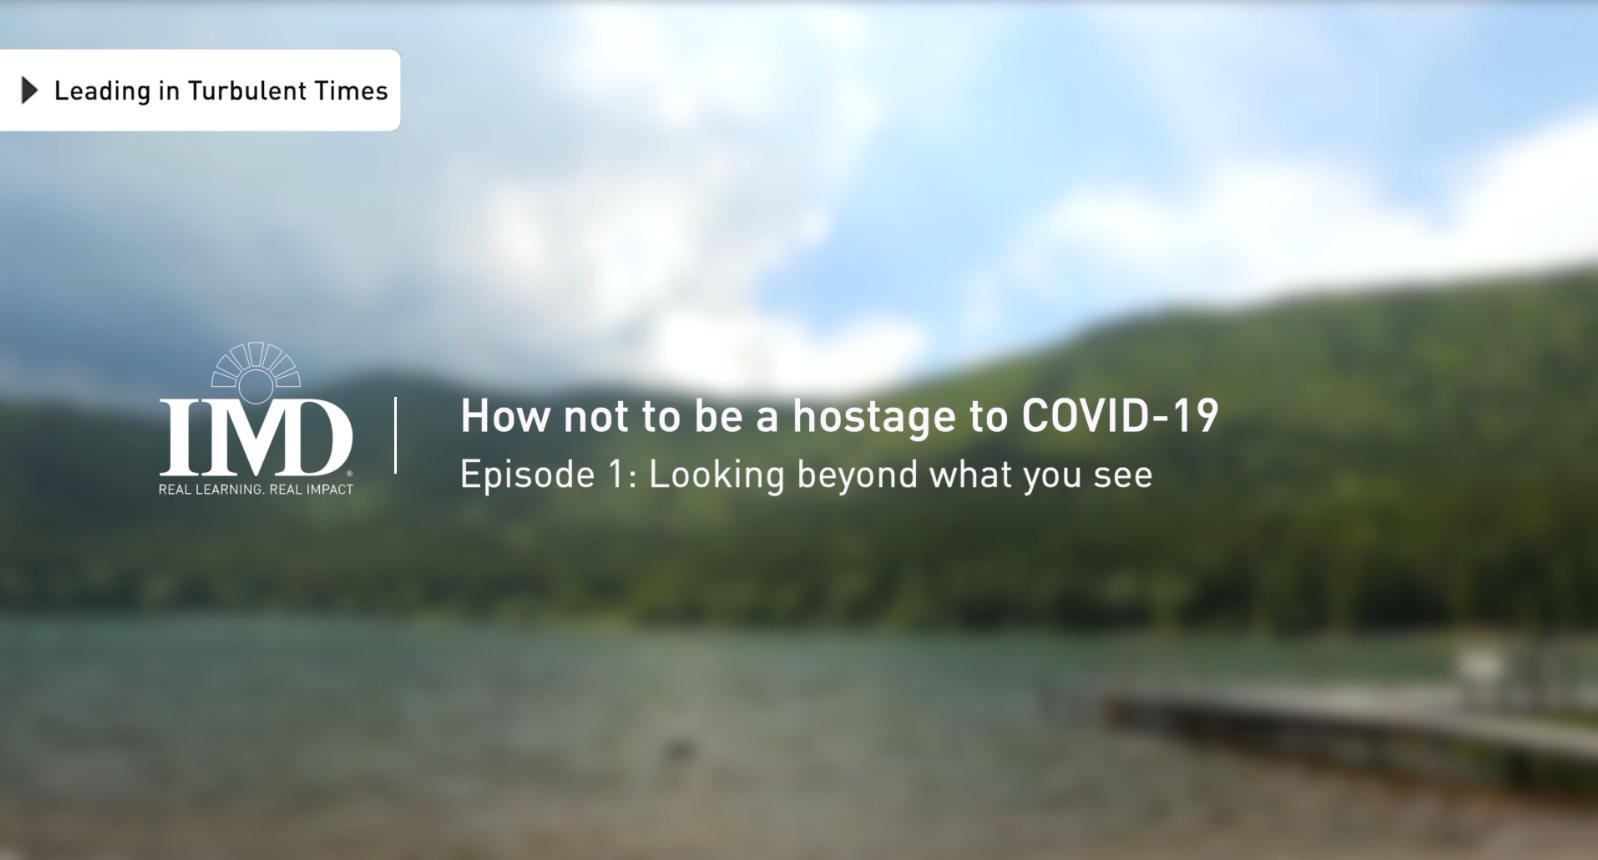 How not to be a hostage to COVID-19: Episode 1